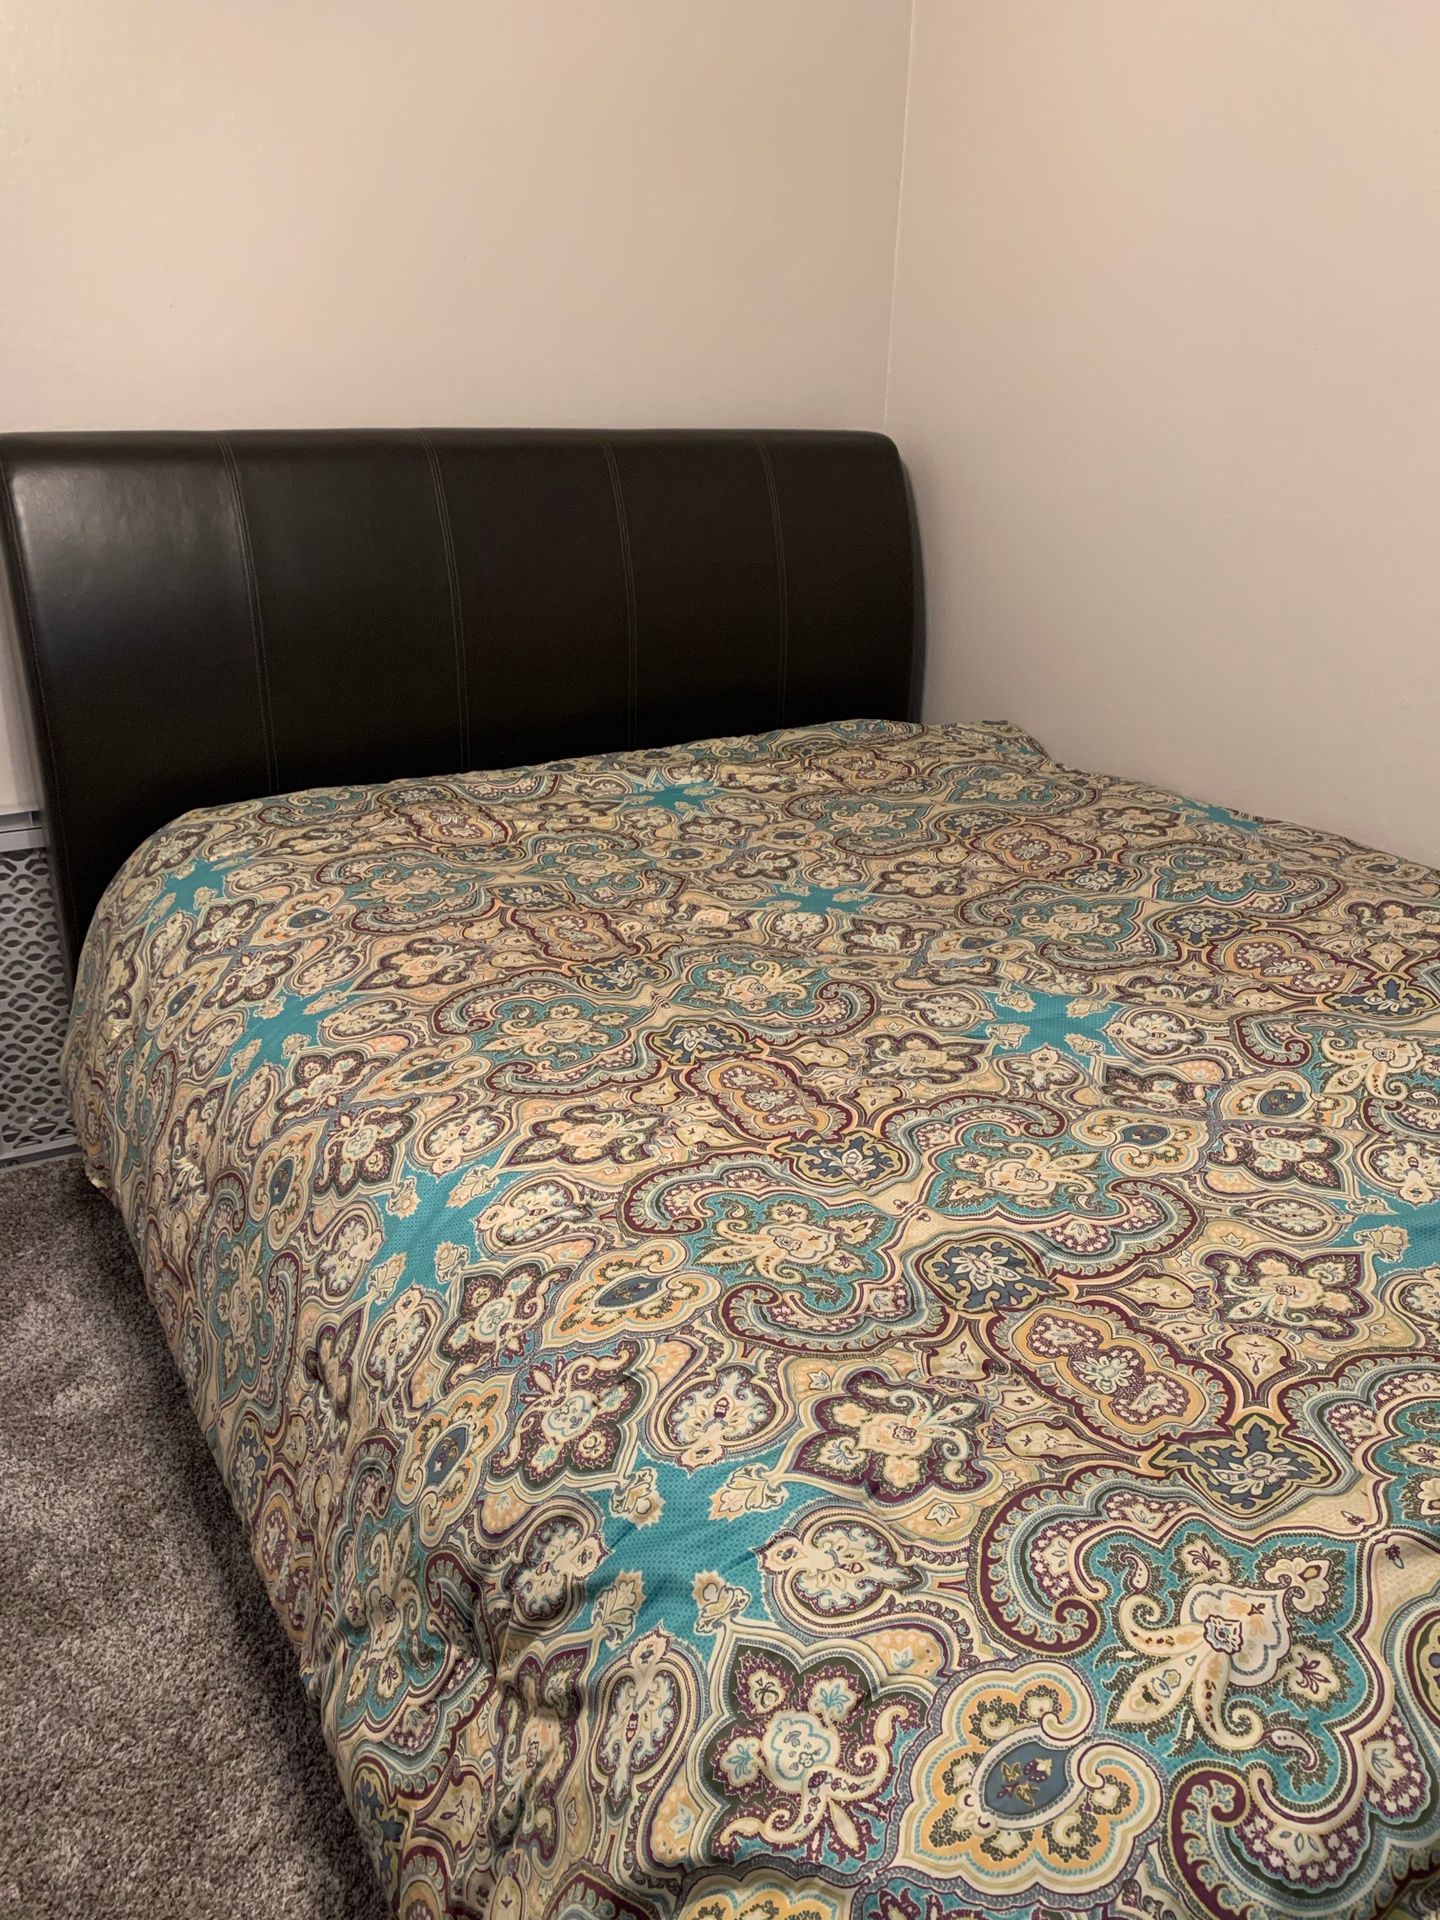 Queen size Serta bed, mattress, and box spring.